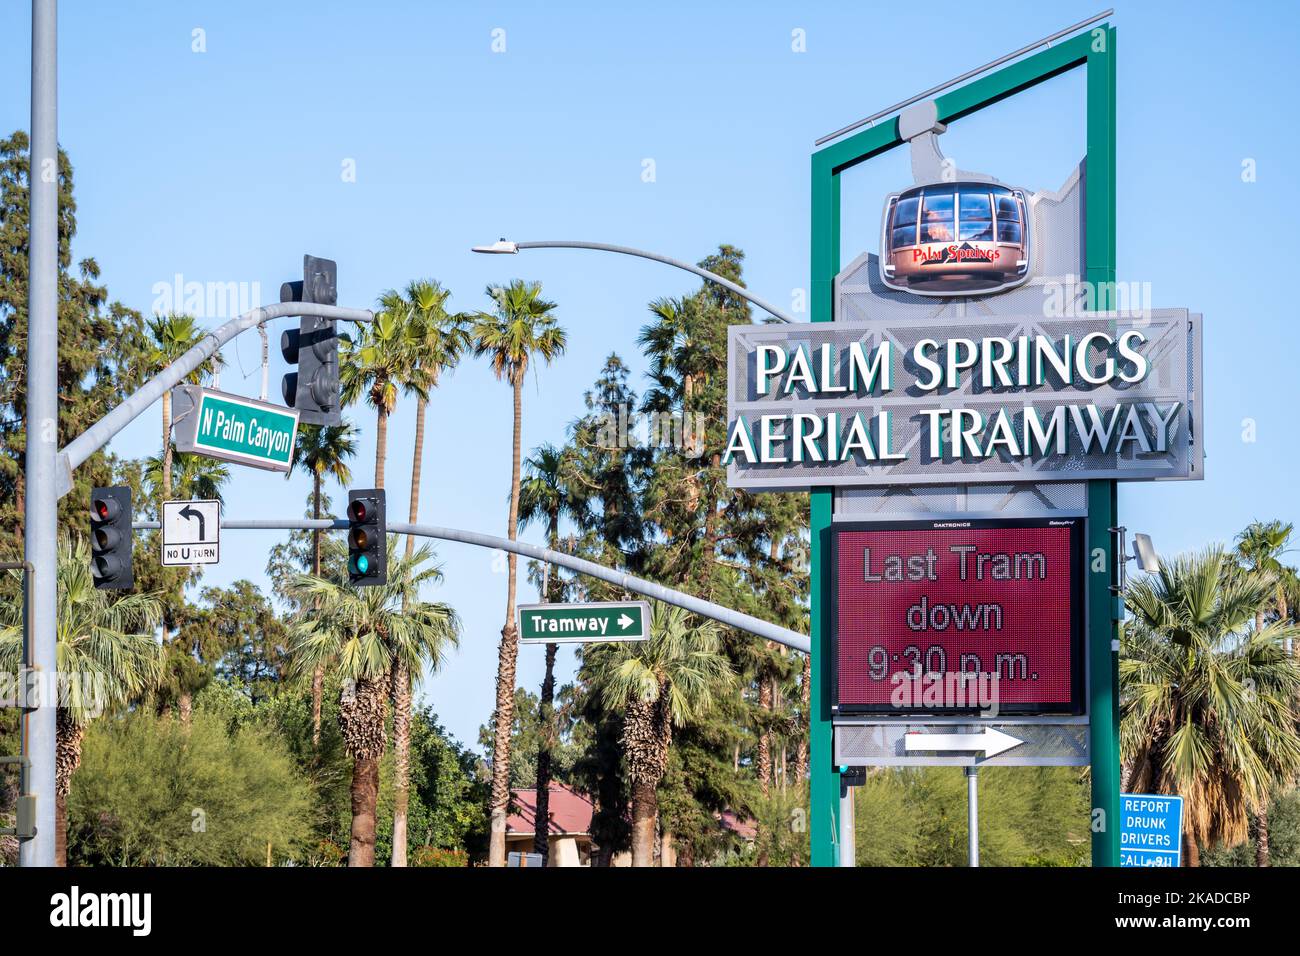 A 'Palm Springs aerial tramway' sign in daylight in California Stock Photo